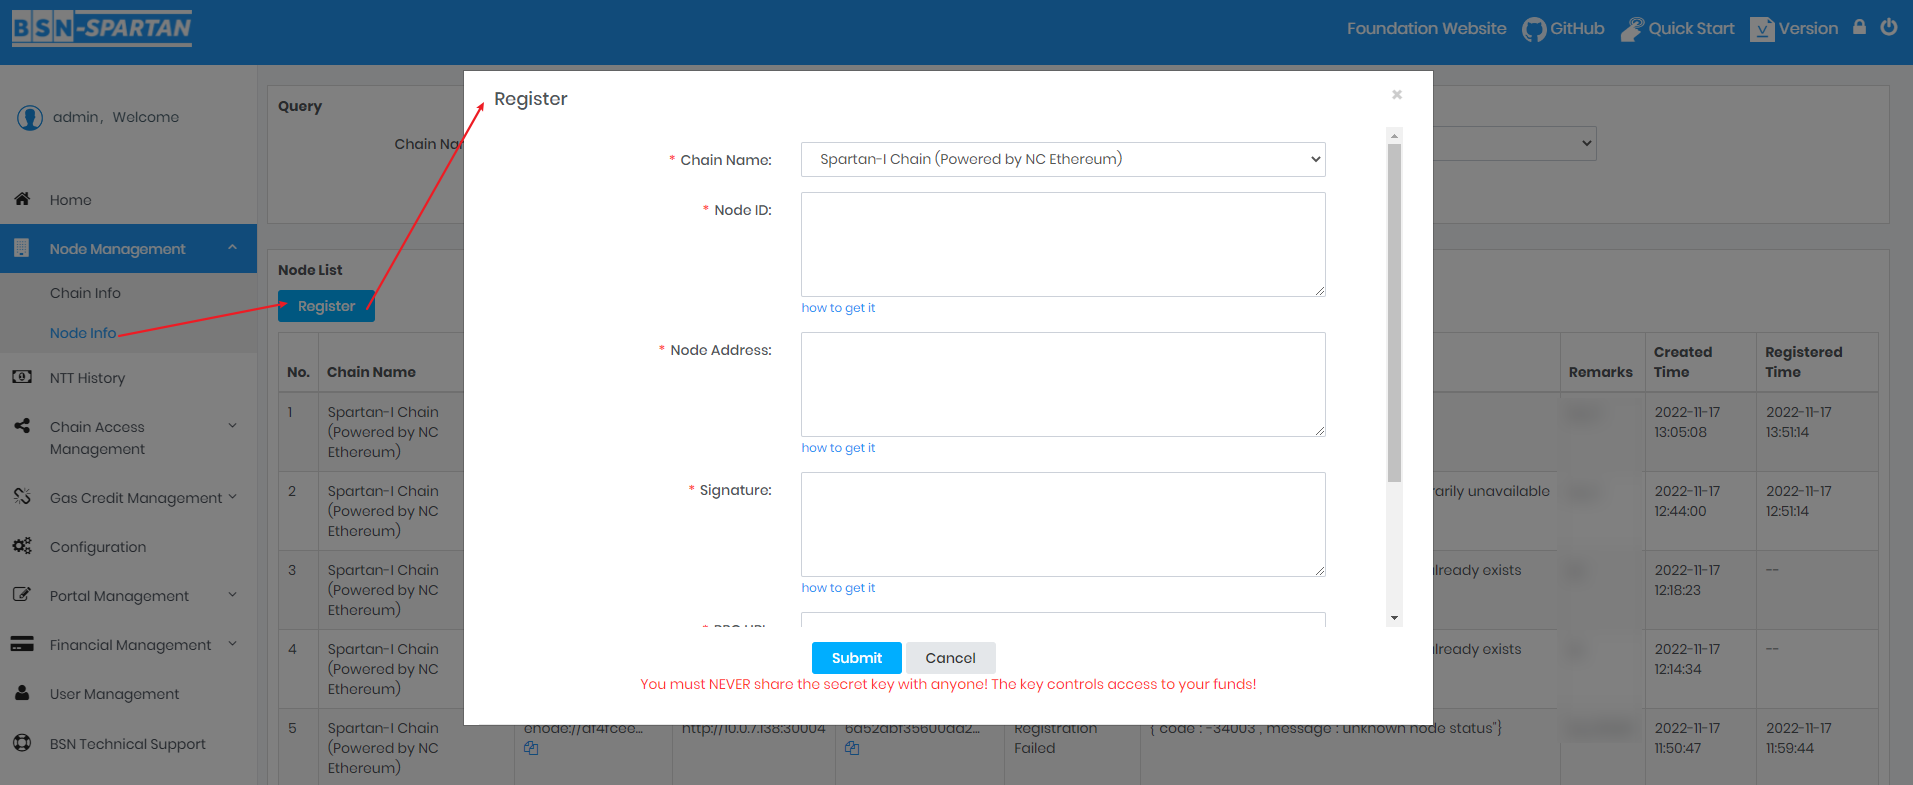 submittheregistrationapplication2